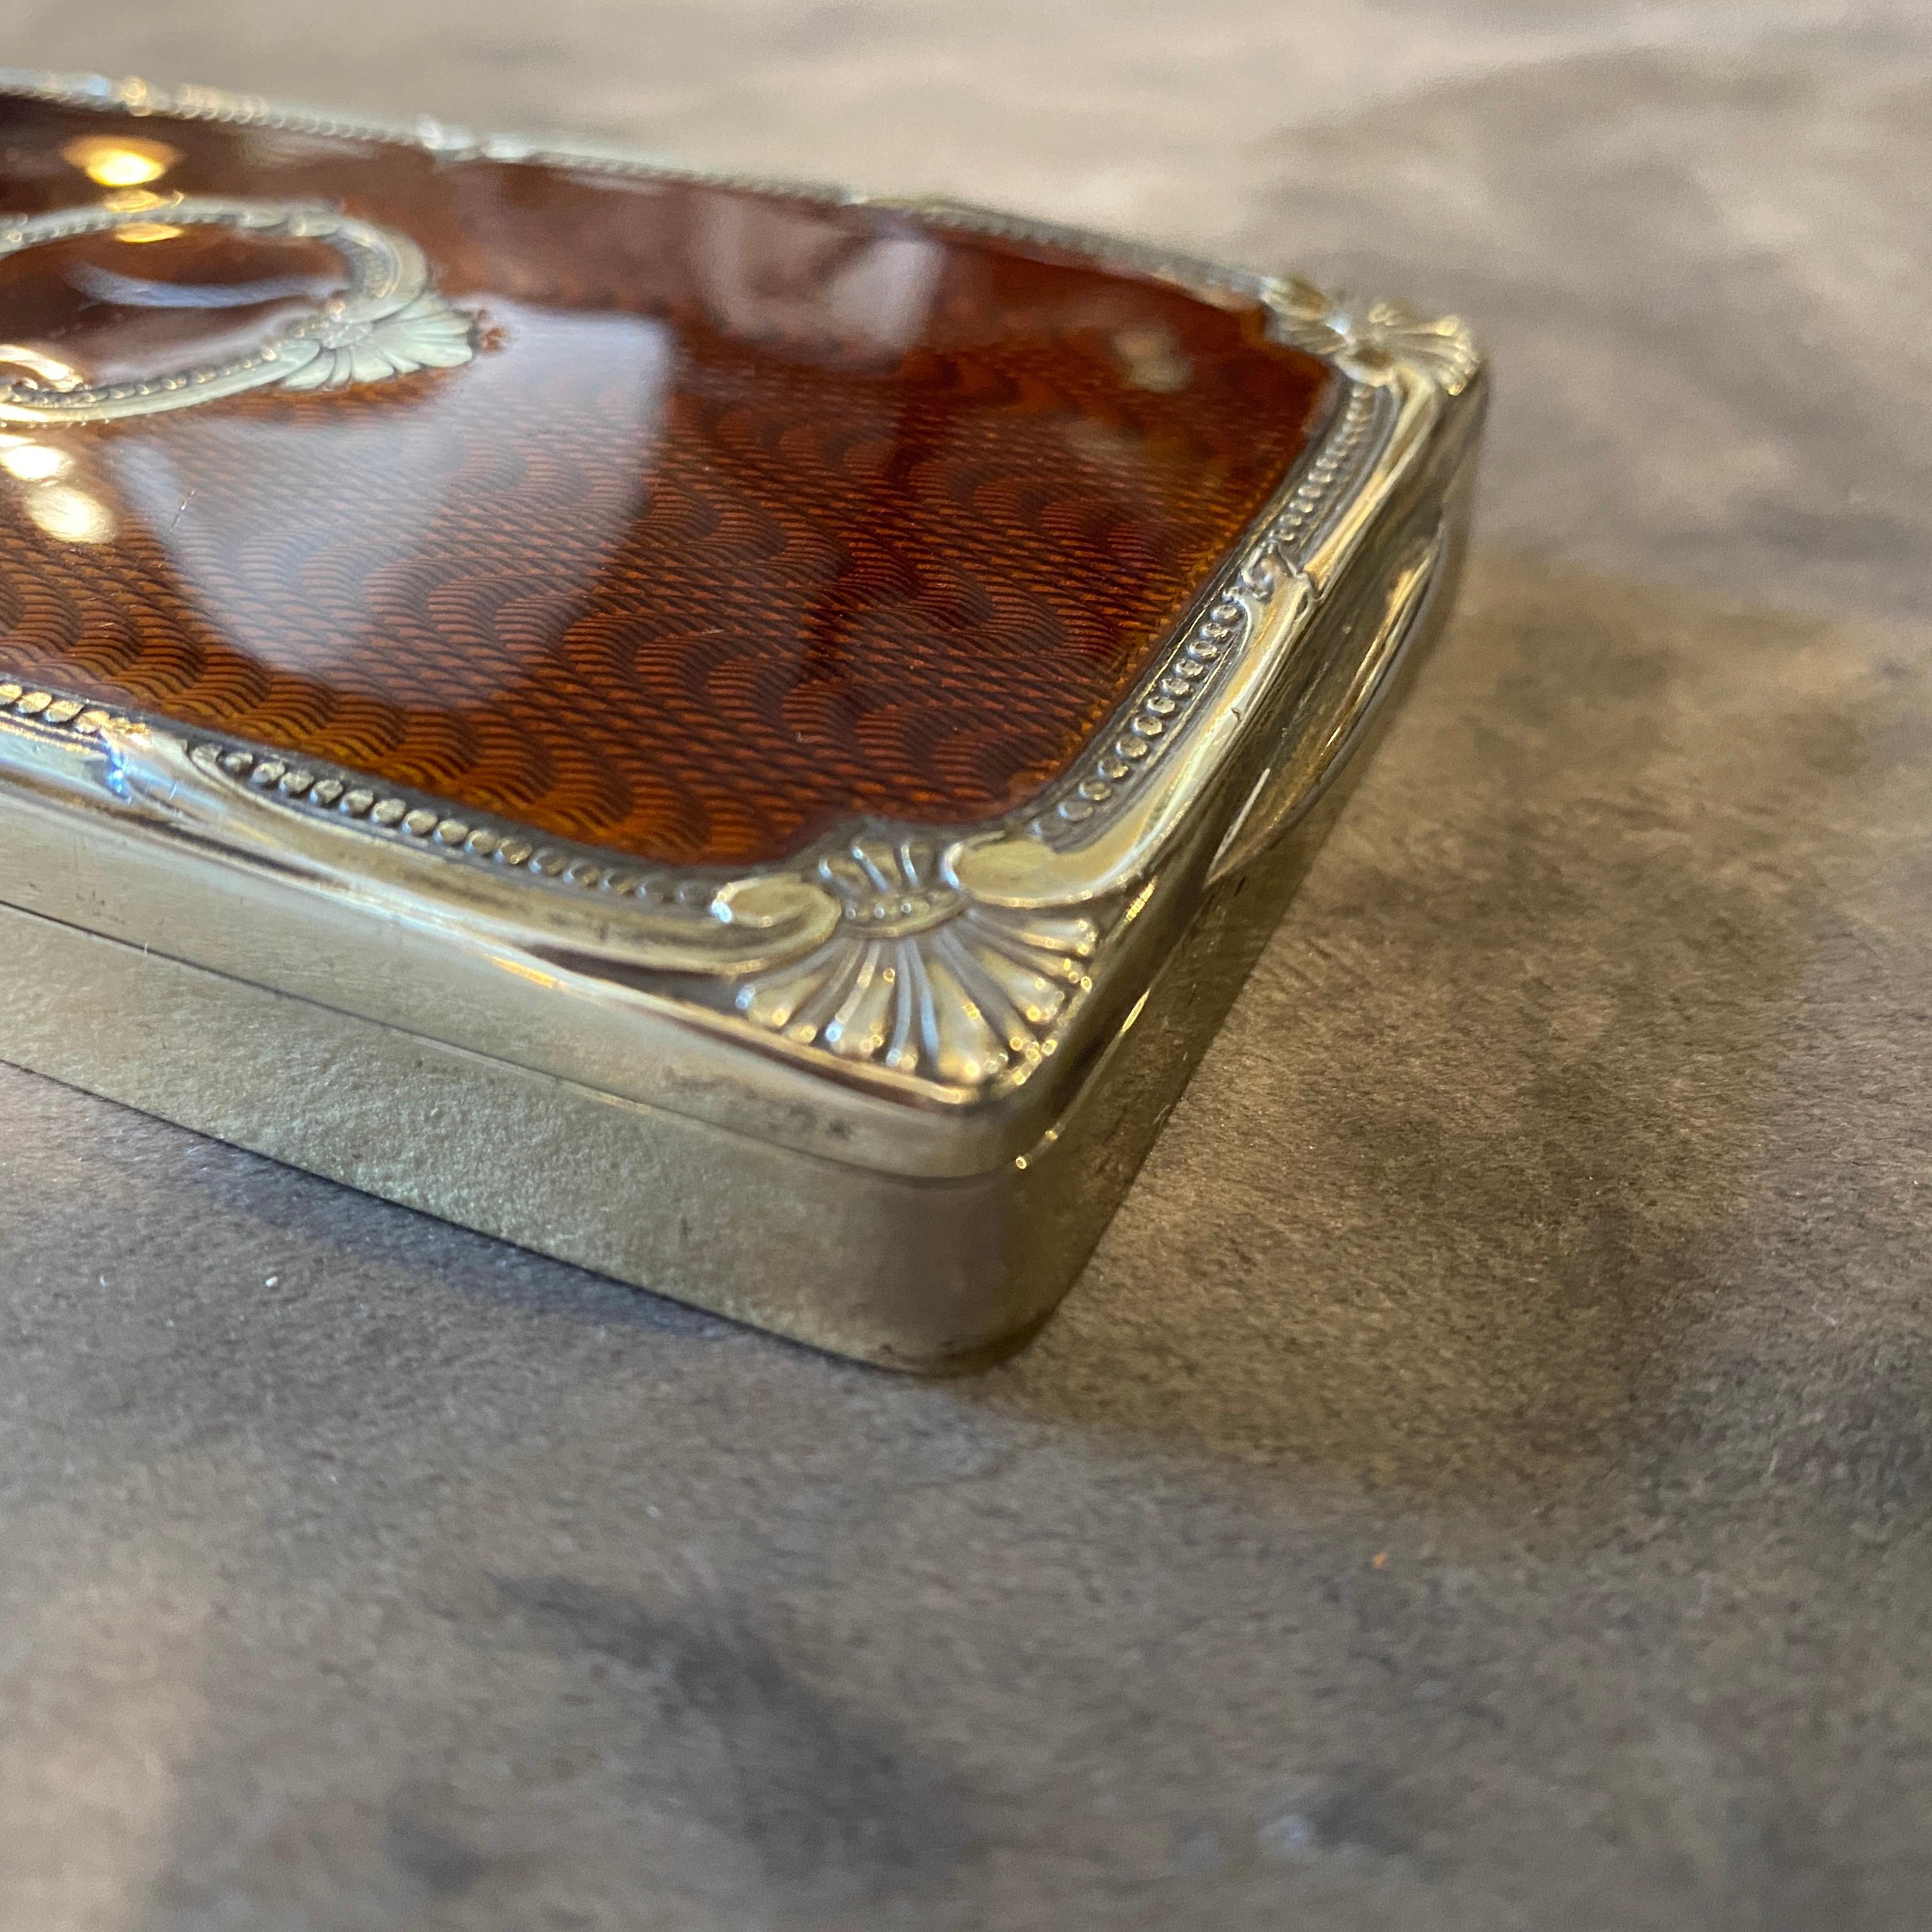 A superb quality brown enameled cigarette box made in Italy in the Seventies by Salimbeni, famous manufacturer. It's all marked vermeil solid silver.